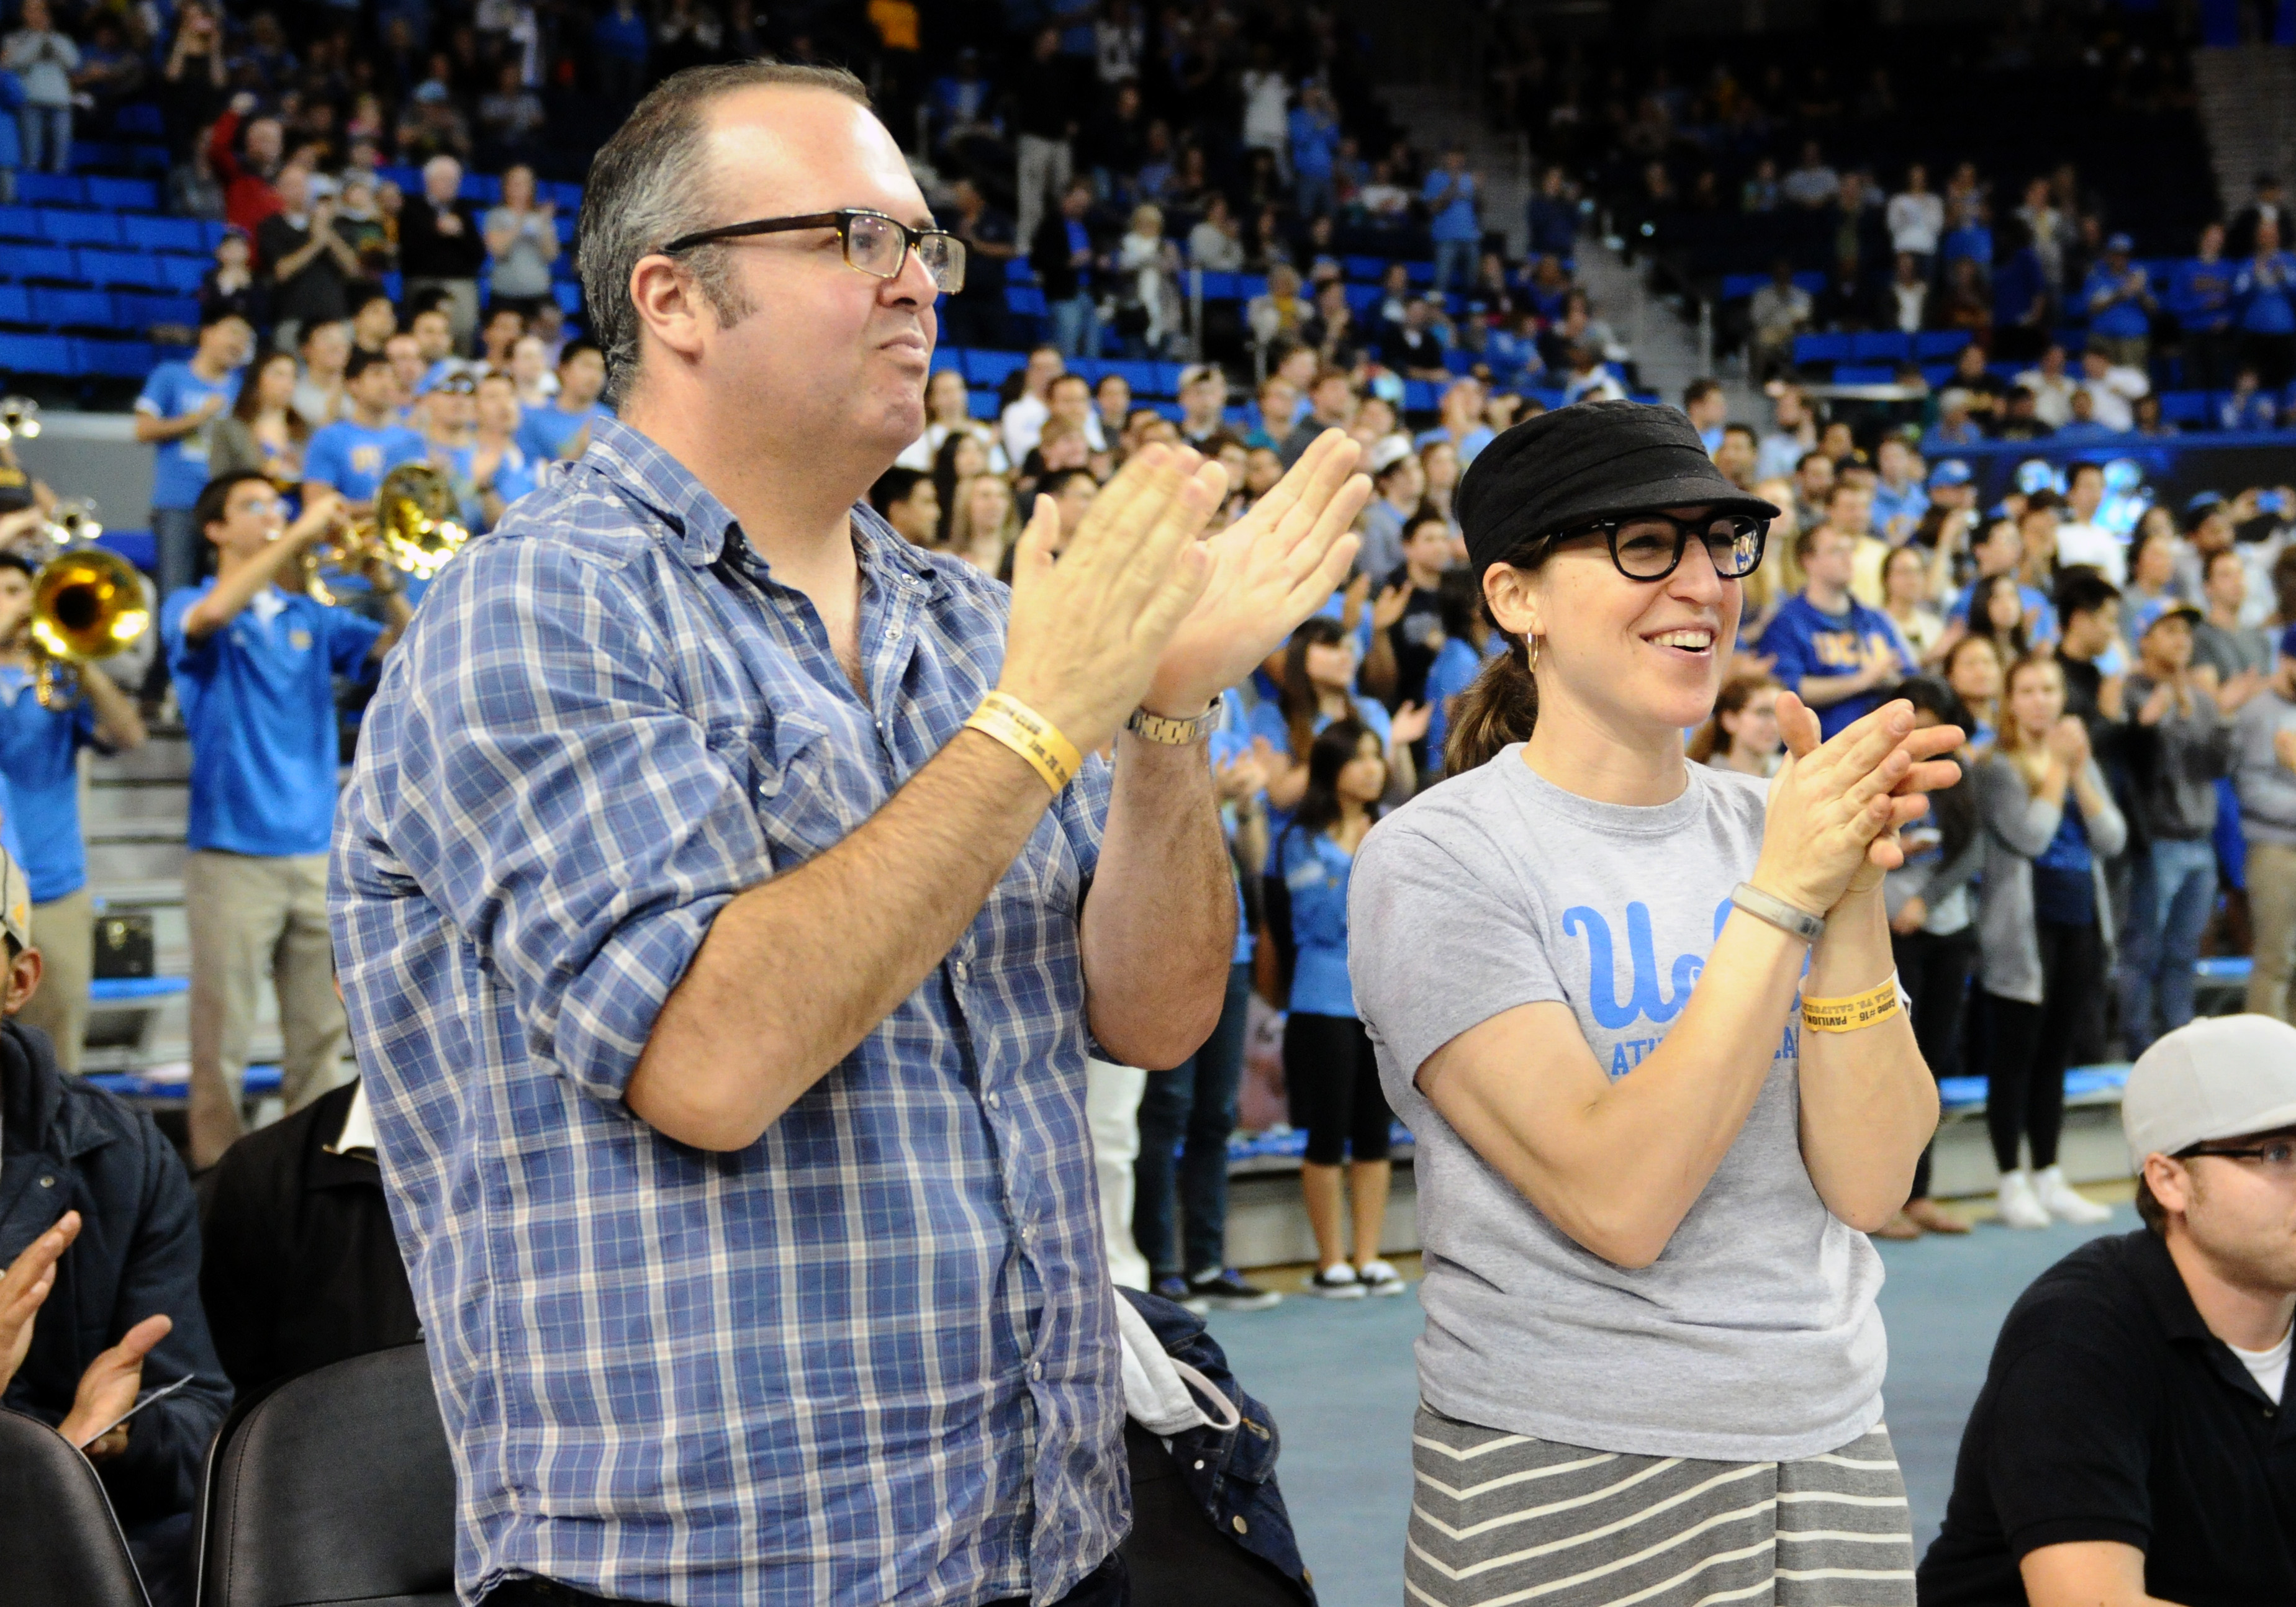 Michael Stone and Mayim Bialik during an NCAA basketball game in Los Angeles, California, on January 26, 2014 | Source: Getty Images